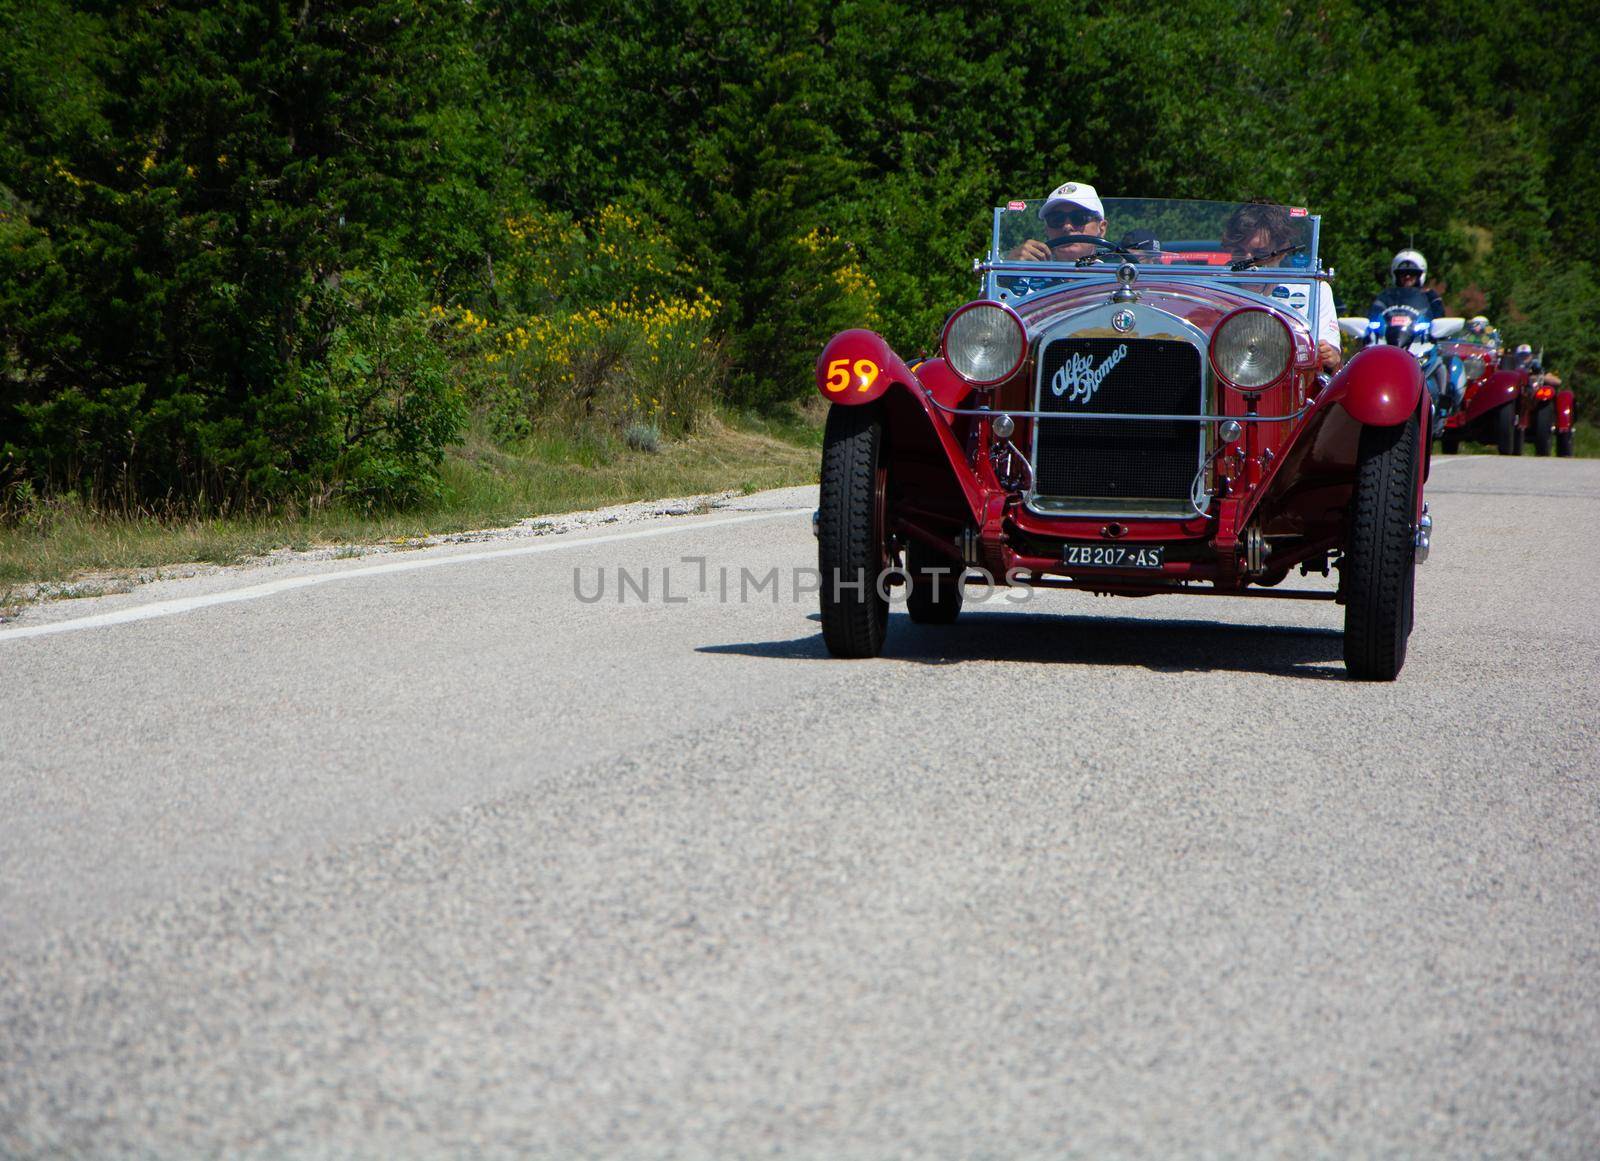 ALFA ROMEO 6C 1750 GRAN SPORT CARR. SPORT 1930 on an old racing car in rally Mille Miglia 2022 the famous italian historical race (1927-1957 by massimocampanari